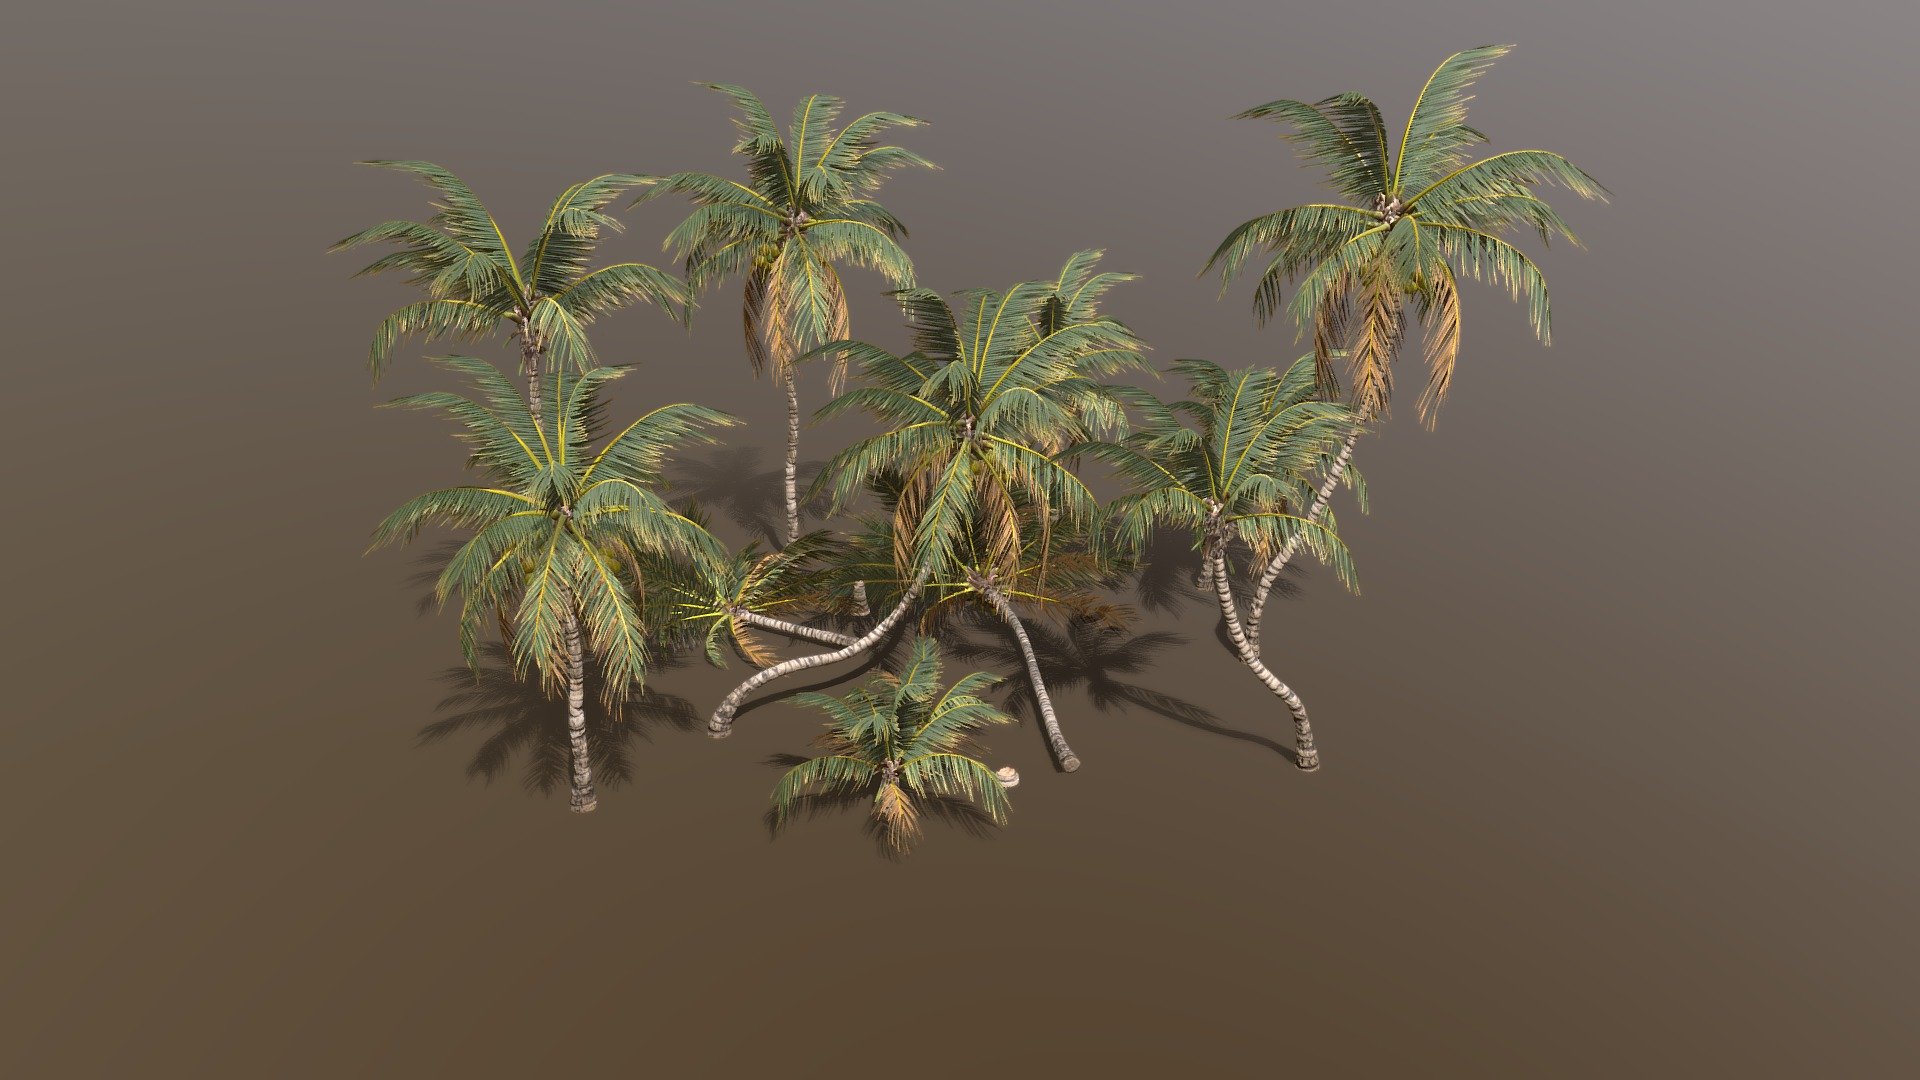 Coconut Palm Pack created in treeit.

Please check out my free models on my sketchfab profile made in treeit for compatibility.

Includes 14 diffrent models.

Each modle has the main model + 5 levels of detail, last LOD is an 8 poly imposter/billboard.

Exported to .fbx .obj .dbo

fbx/dbo format includes vertex colors for vertex shader wind animation.

Includes the tree it .tre project.

Texture size is 2k x 2.

Why am I selling this model?. Im the creator of treeit, a free tree generator that these tree models are created in. Having tree packs for sale will incentivise and insure further development of the program that is in need of improvement 3d model